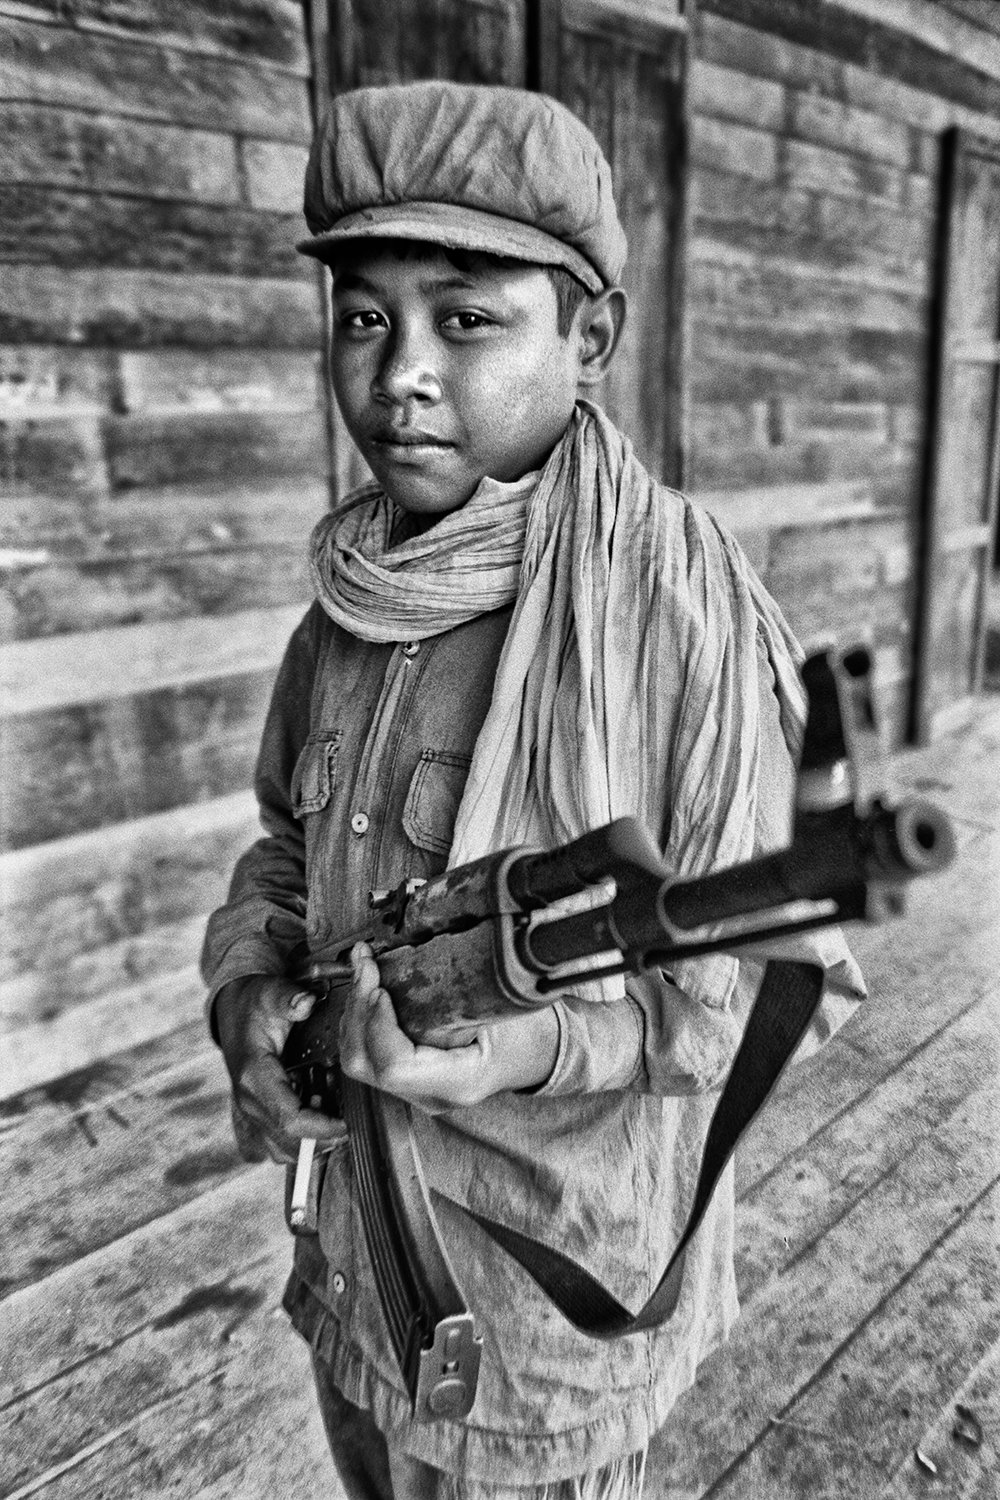 Young Khmer Rouge soldier with AK47 in Cambodia during Pol Pot regime Photography Pierre Toutain-Dorbec.jpg